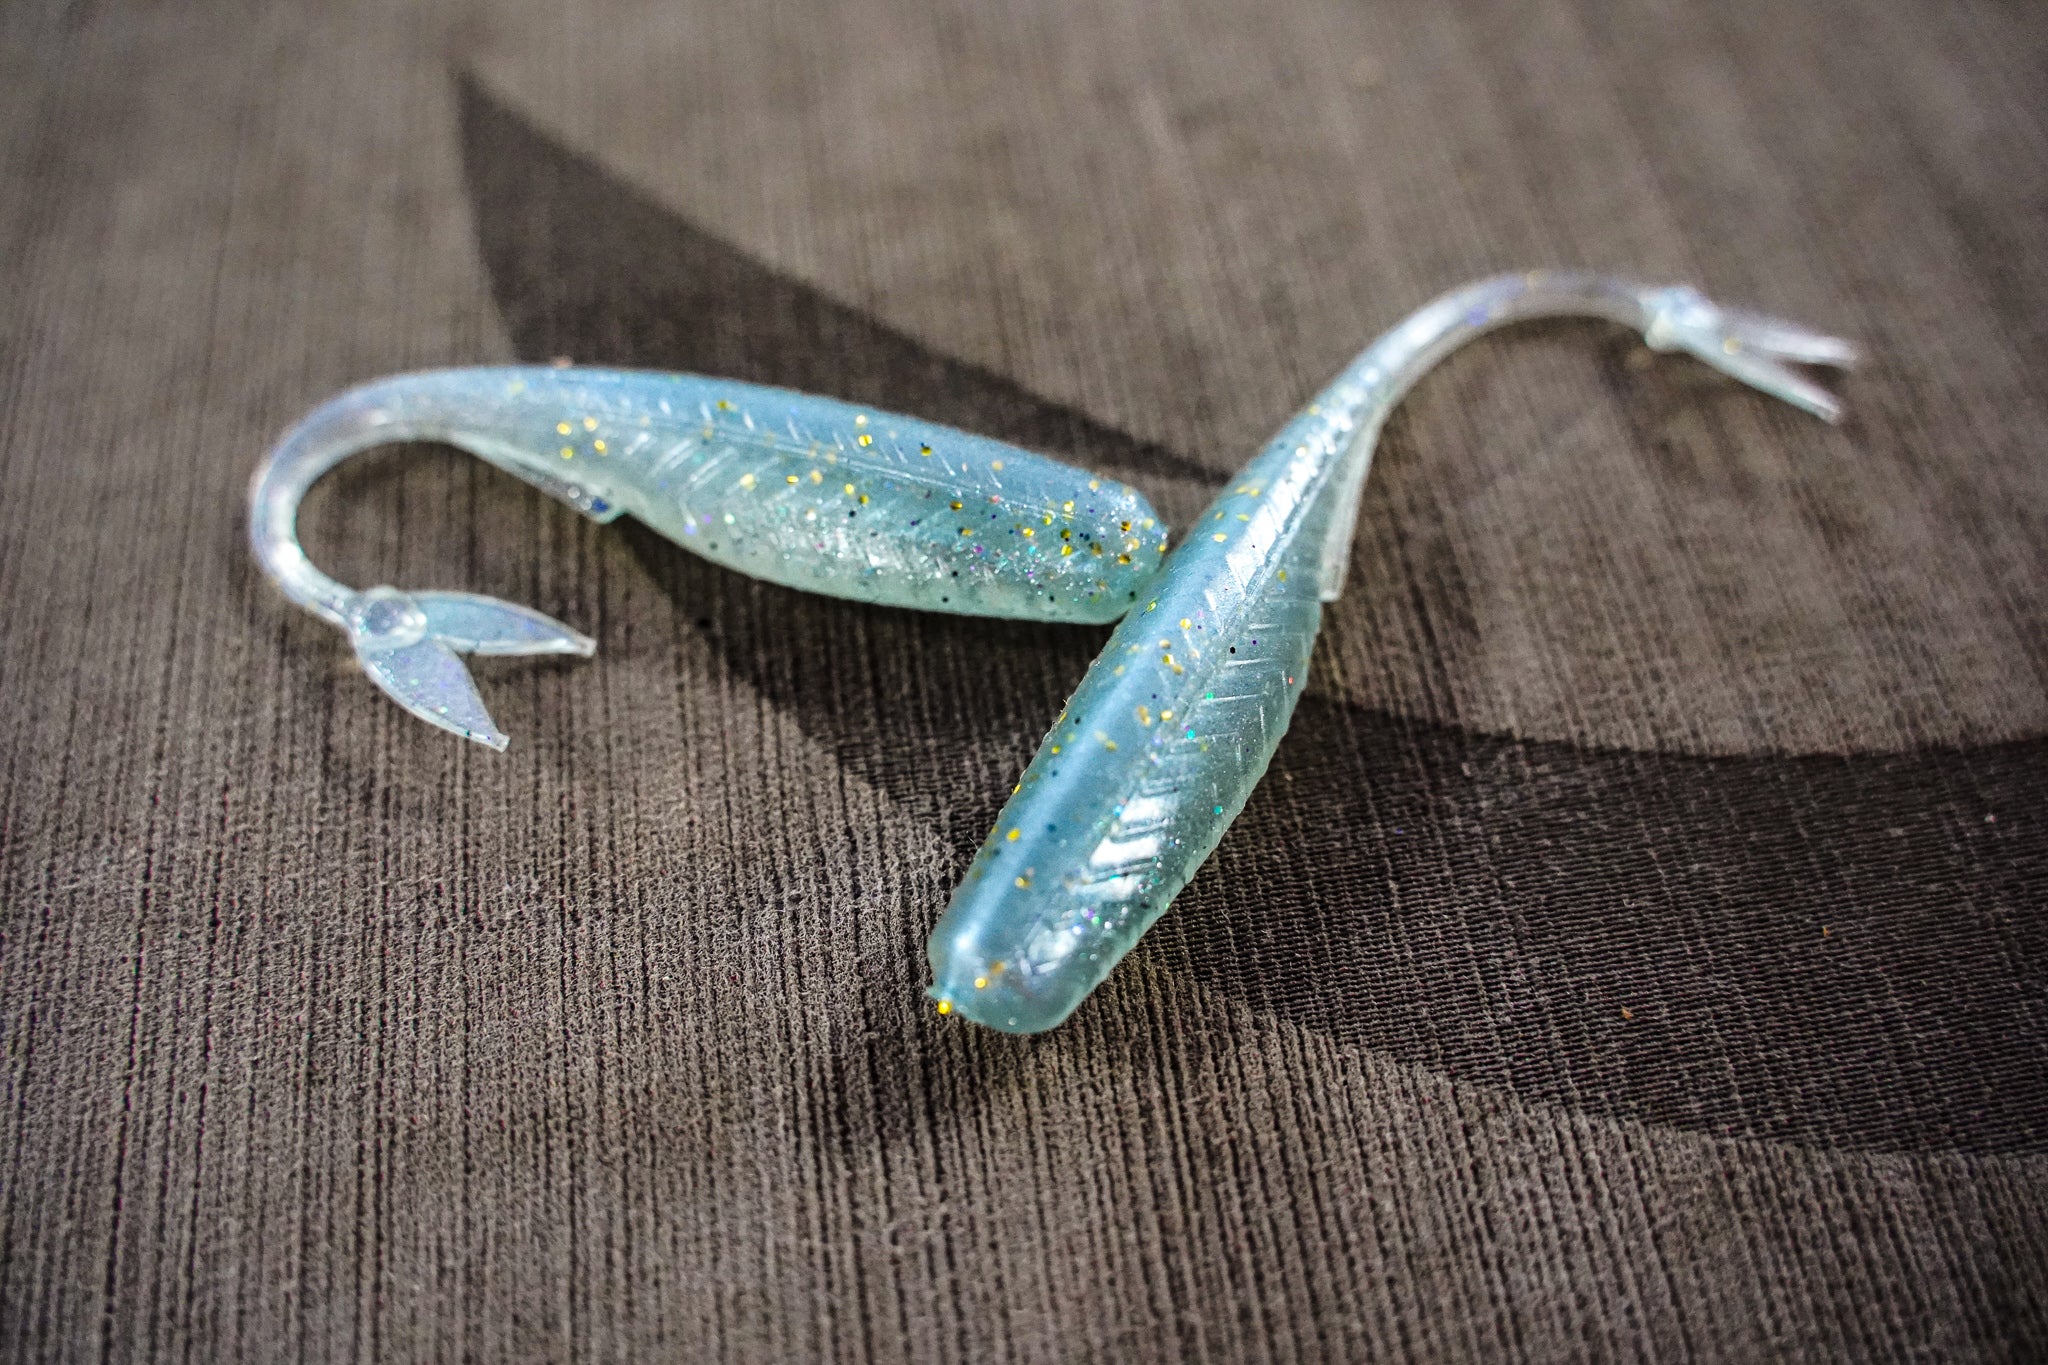 The 6th Sense Fishing 4 Juggle Minnow is a bite-sized lure that